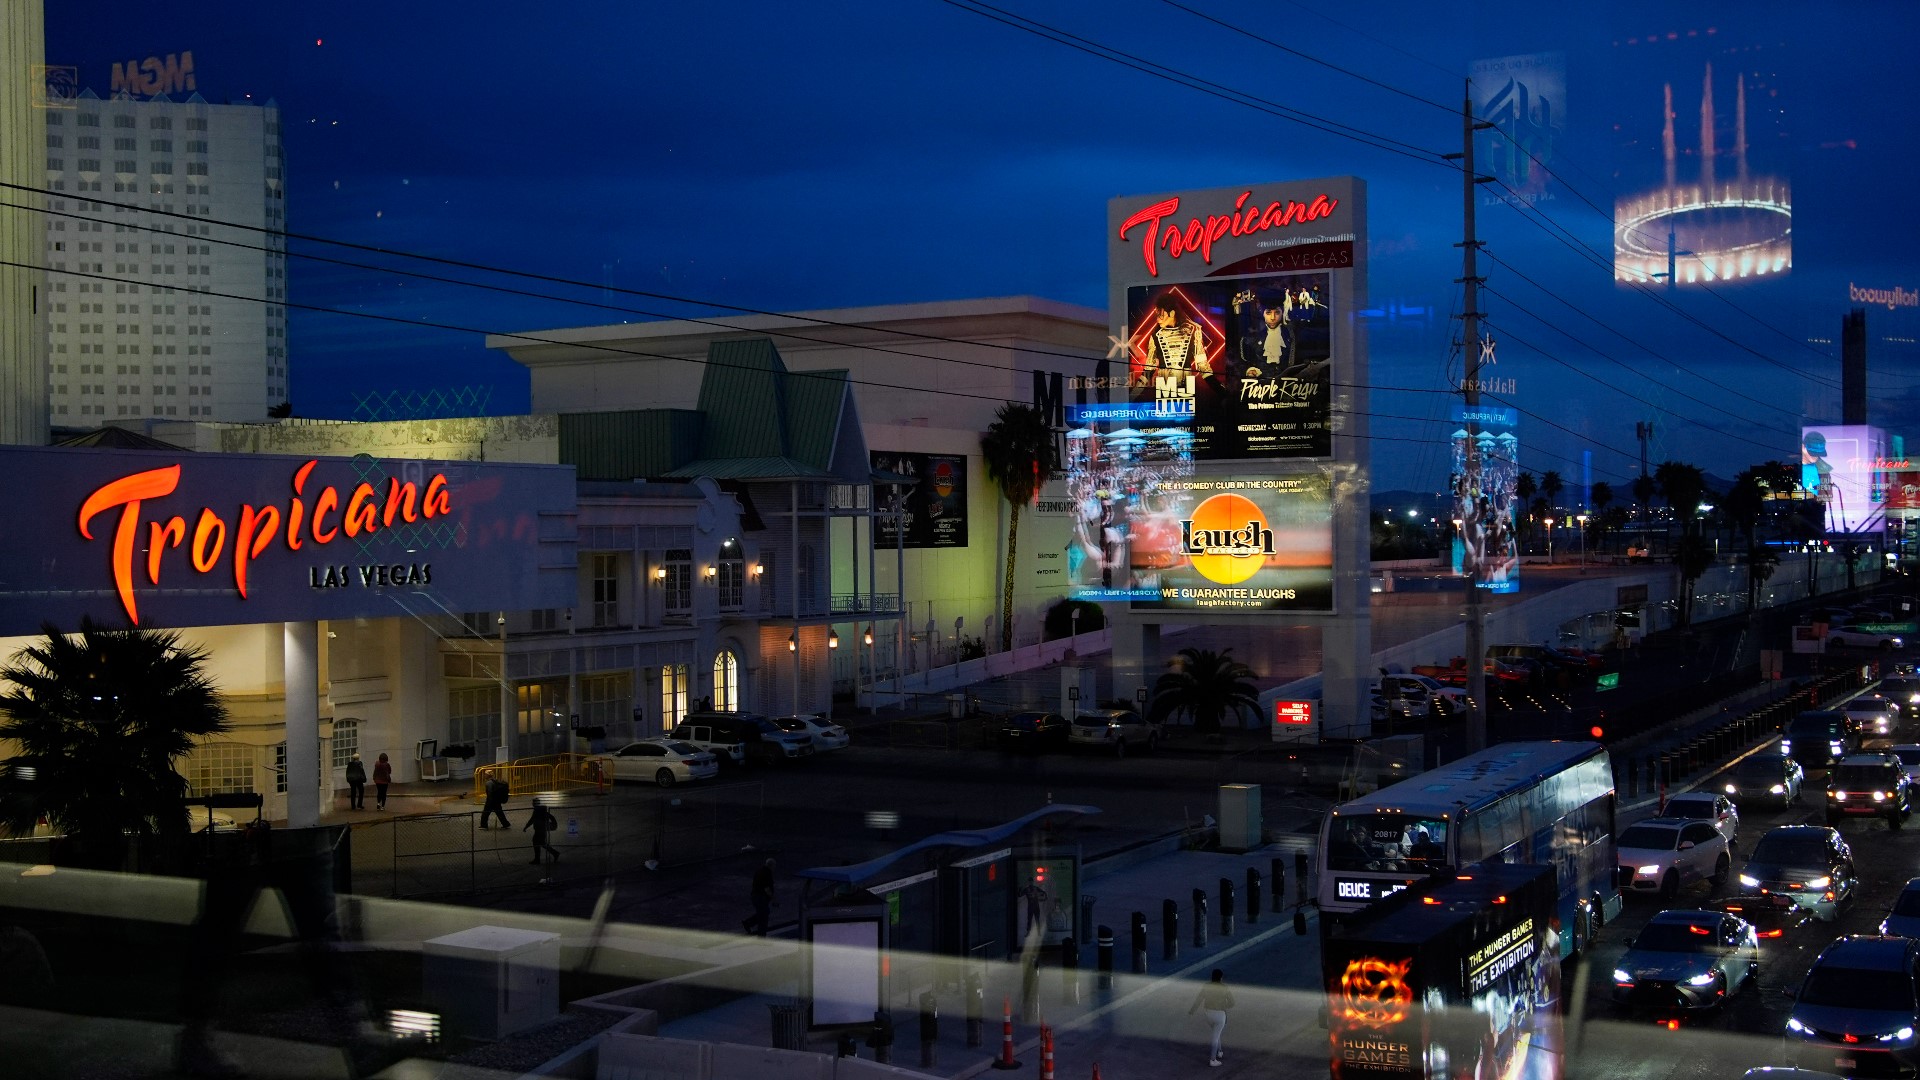 Since its opening, the Tropicana Las Vegas has been a familiar landmark in the city. But the resort is being torn down to make way for a new baseball stadium.